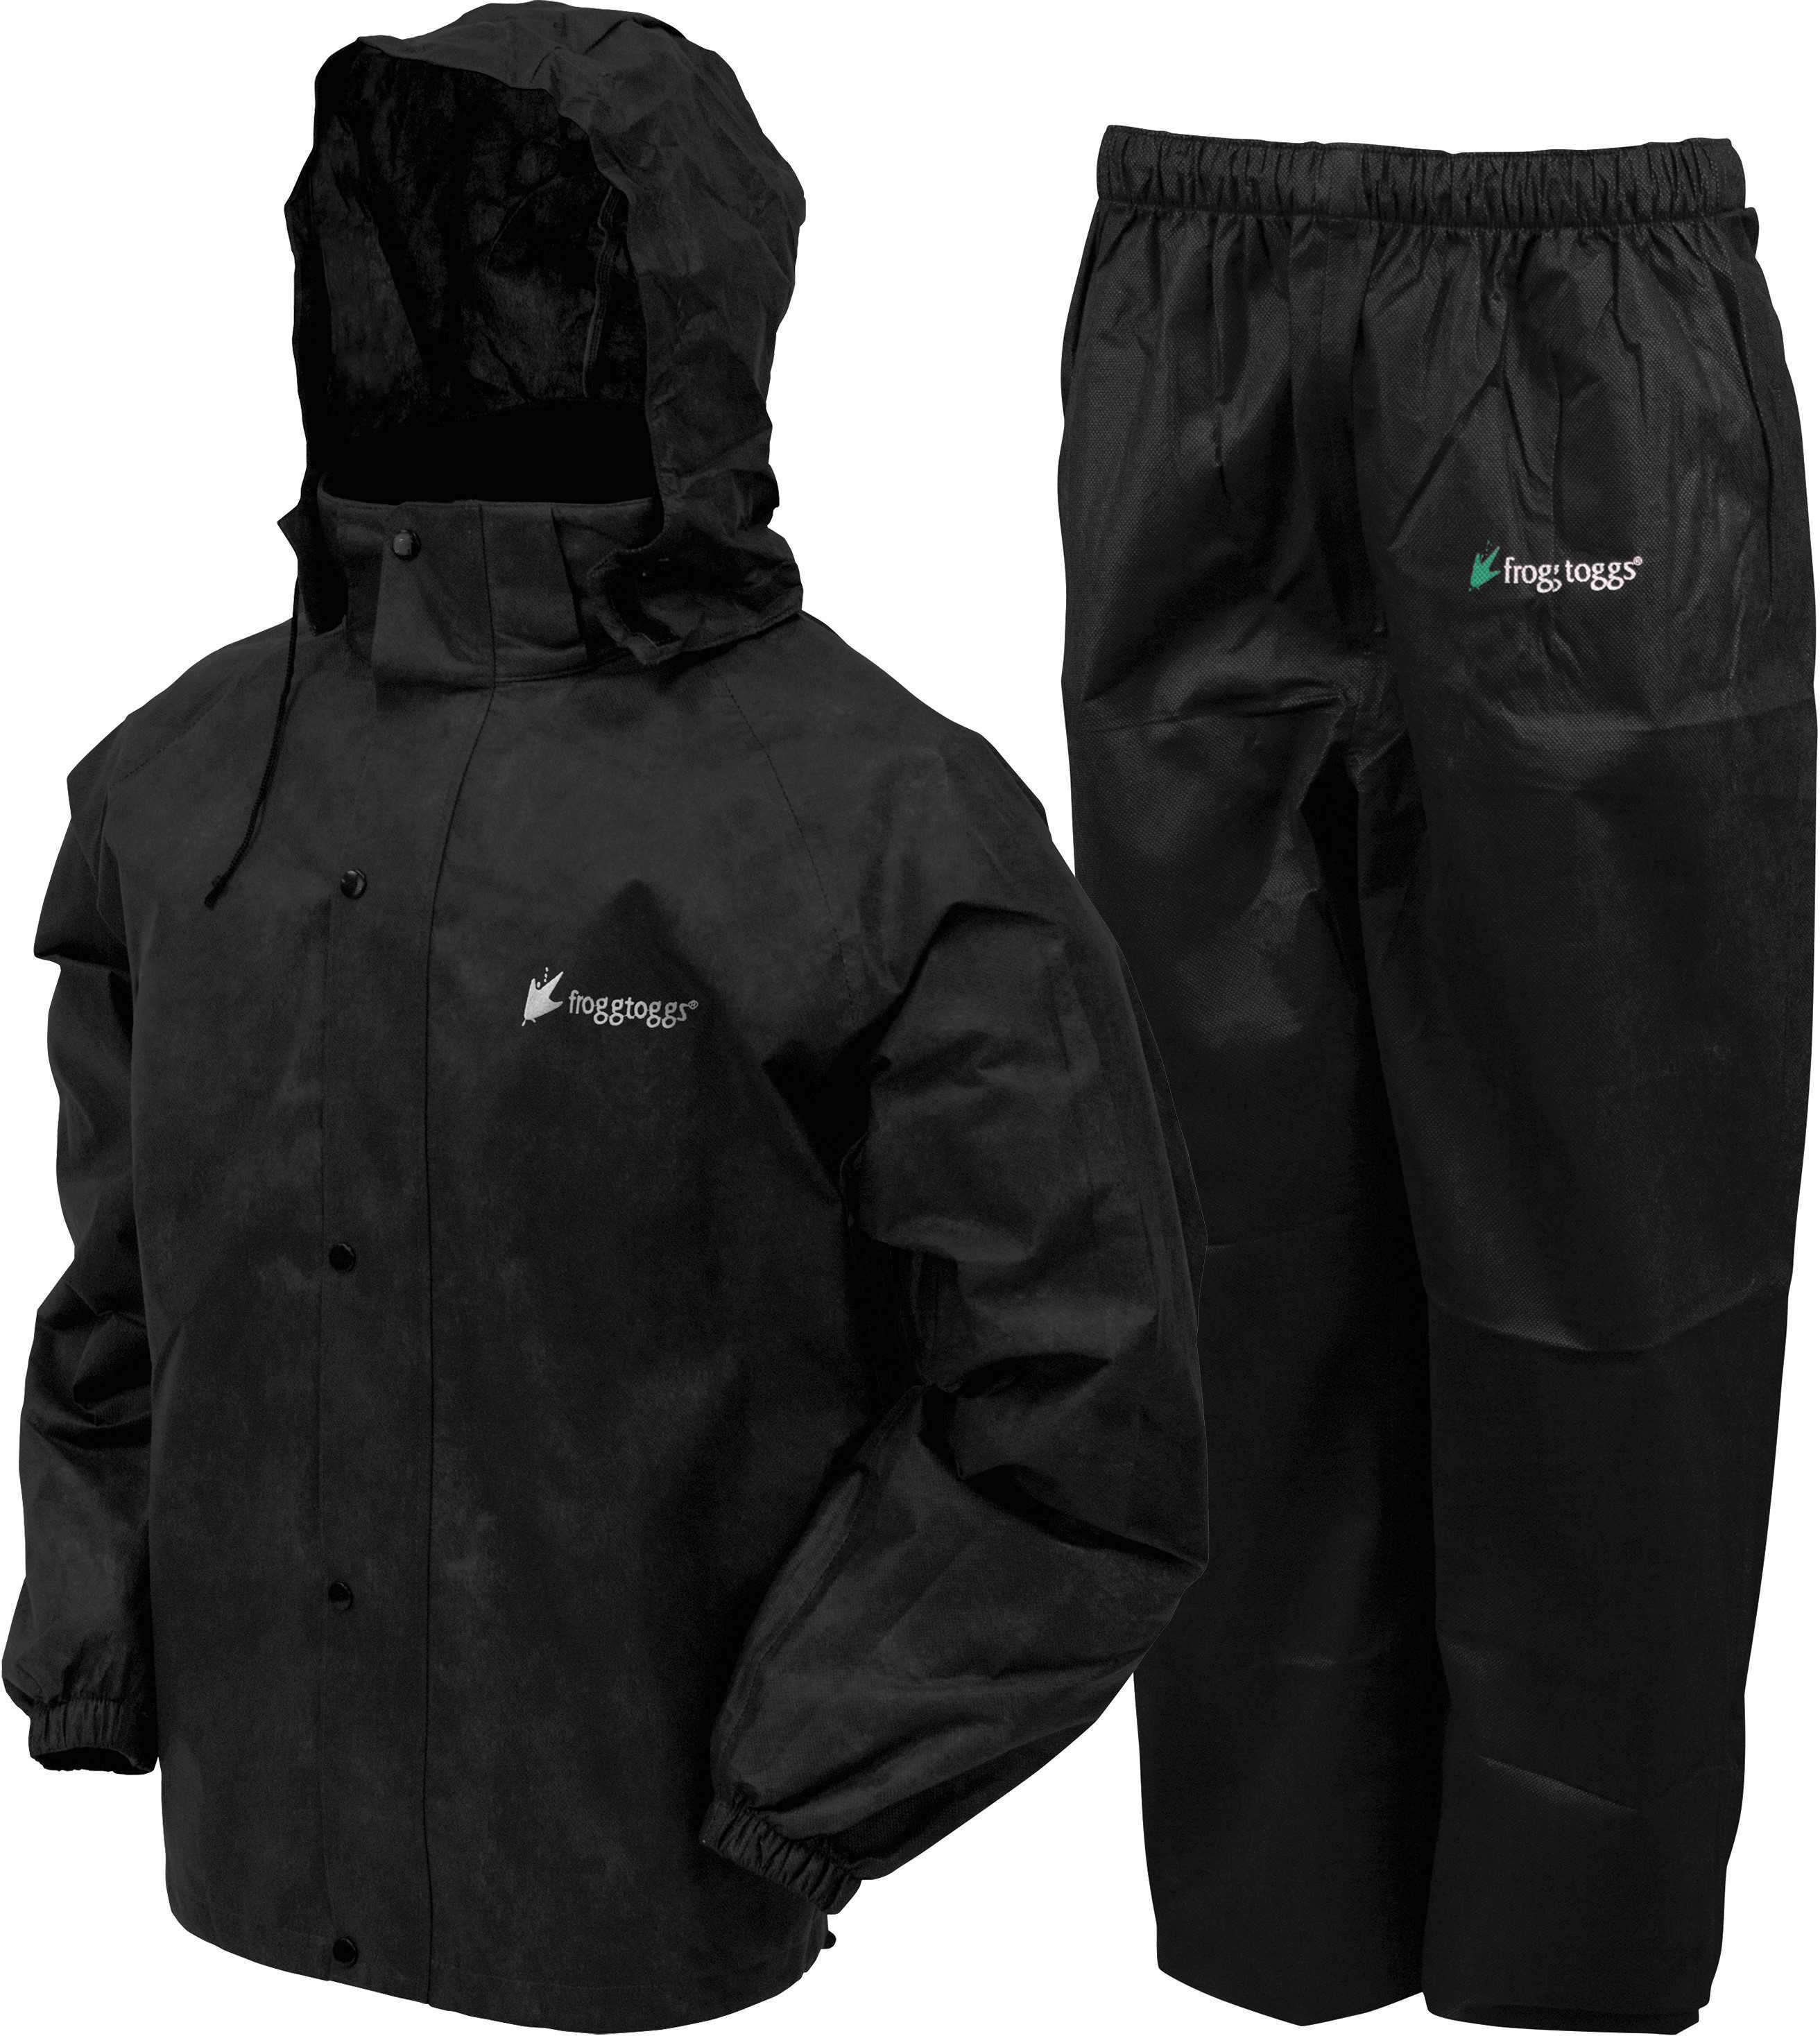 Frogg Toggs All Sport Suit Black Size Medium, Model: AS1310-01MD